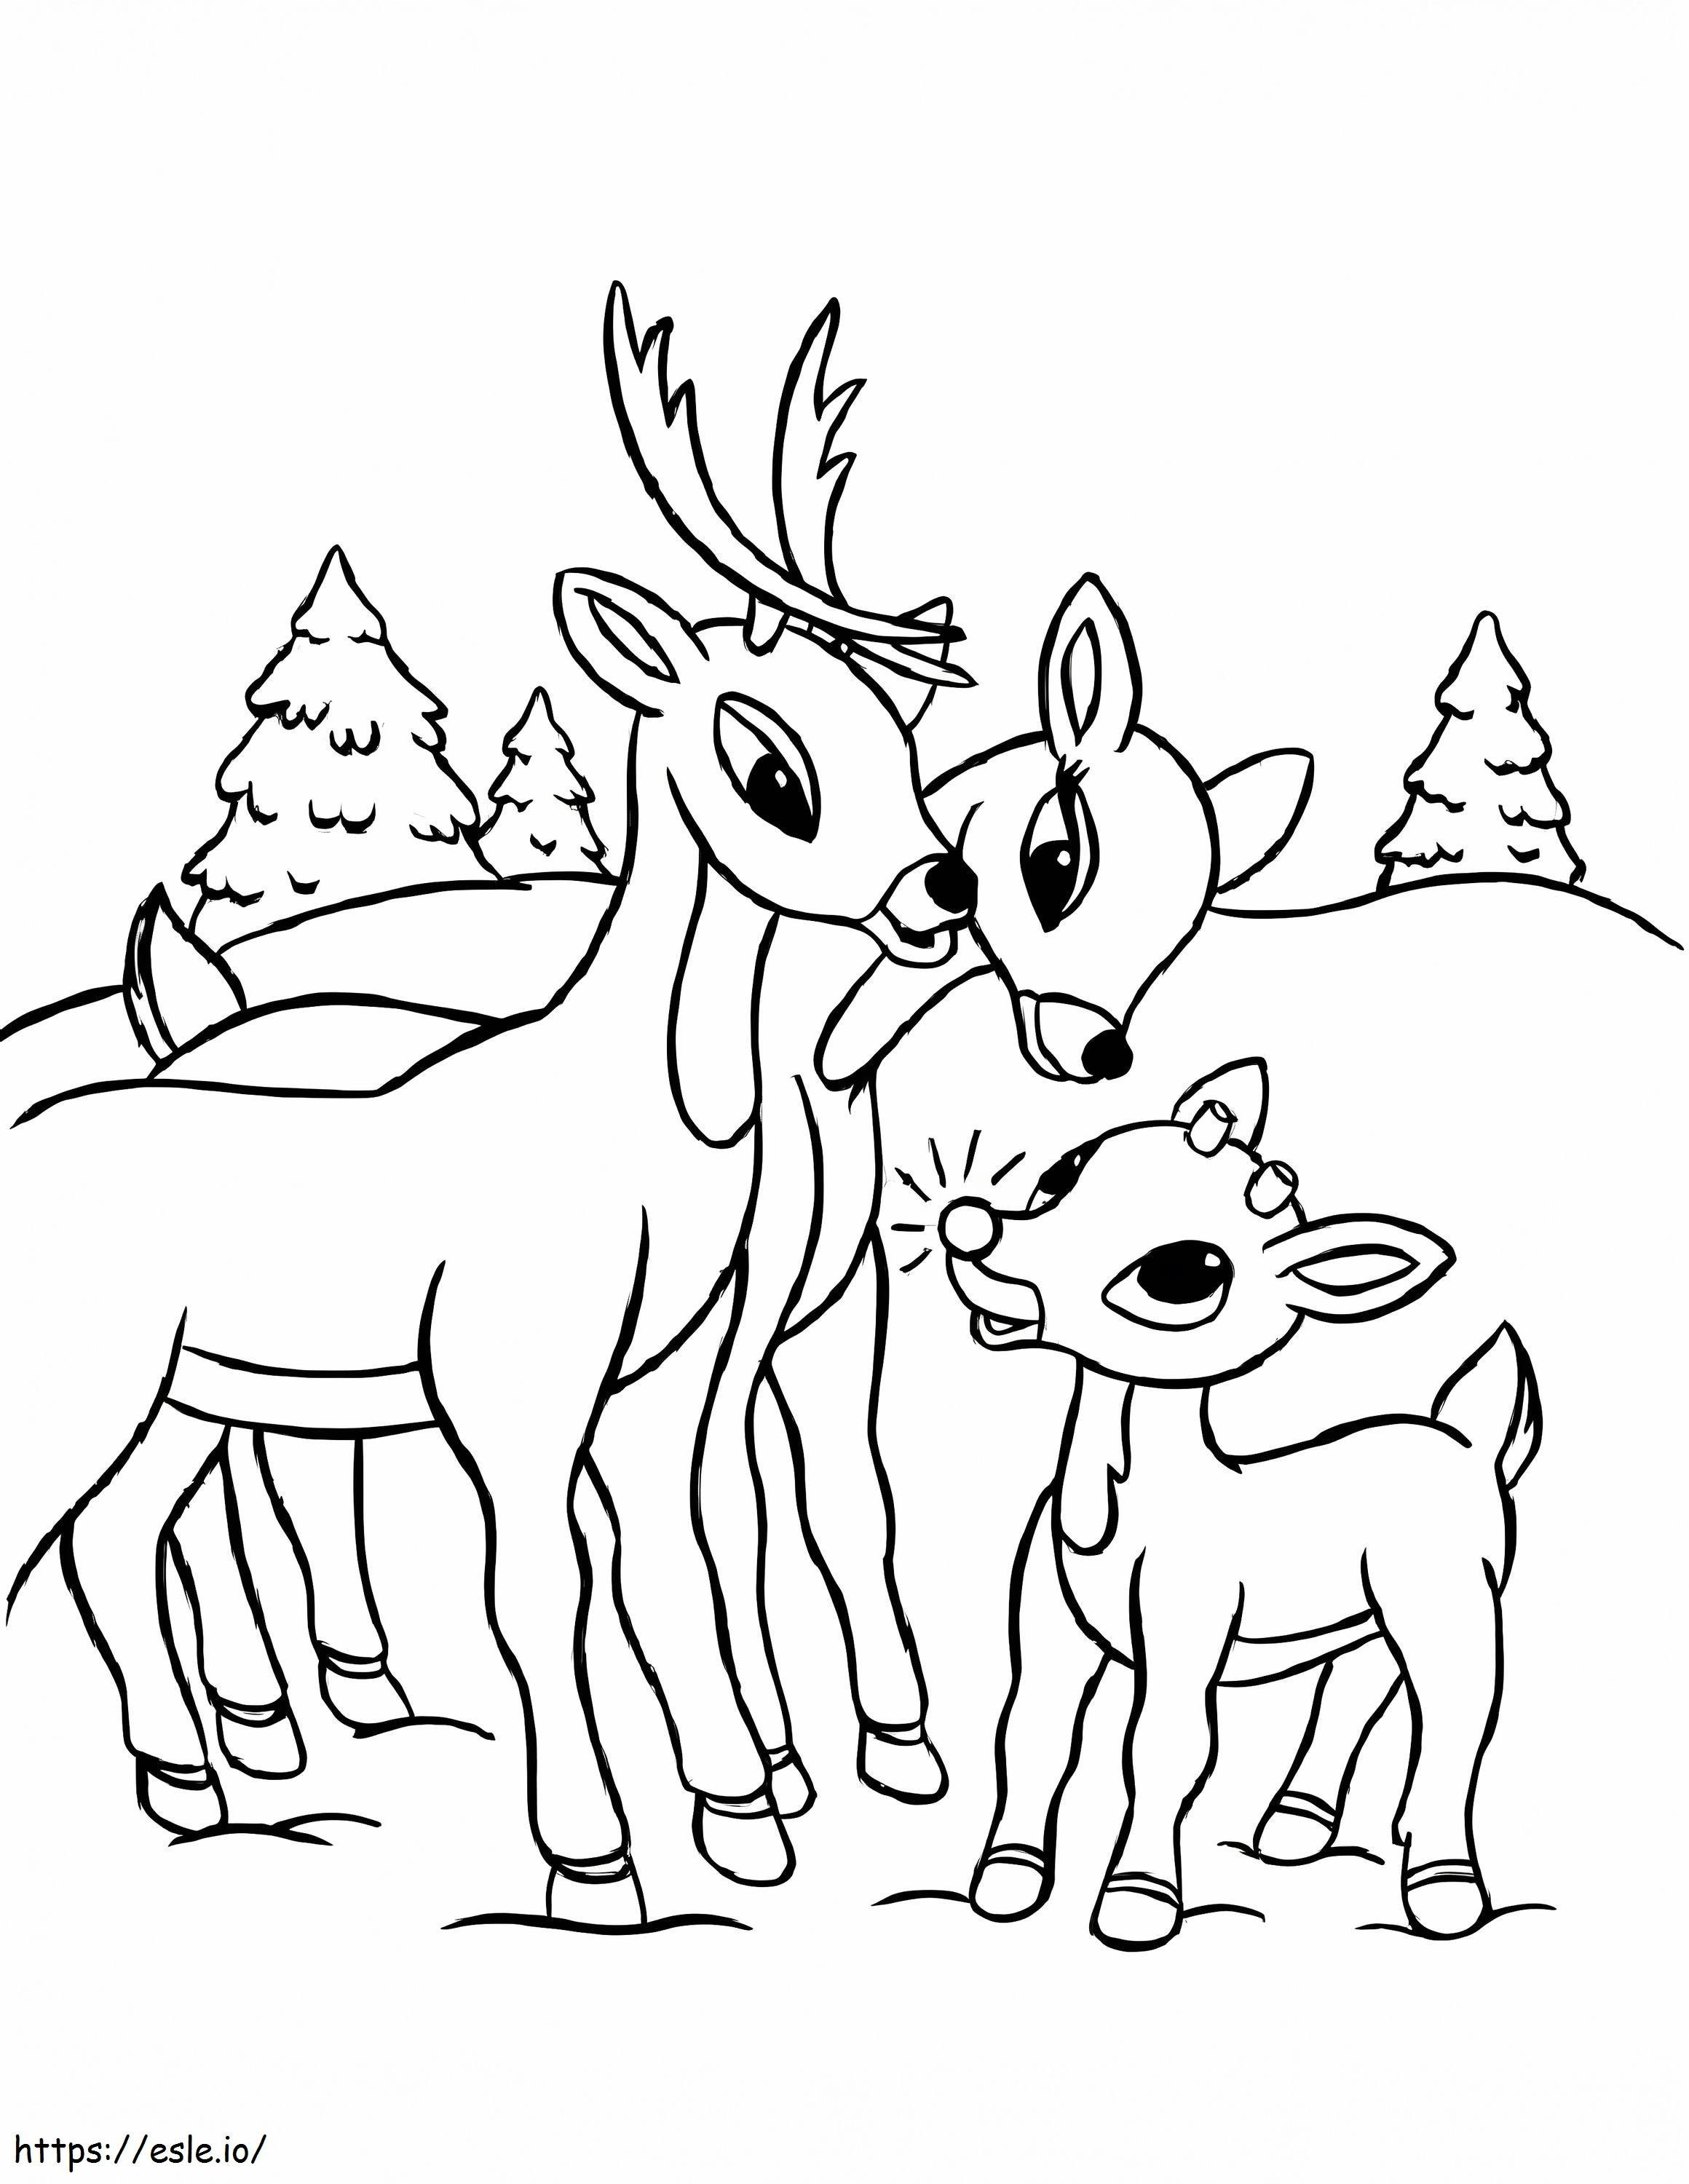 Rudolph Family coloring page